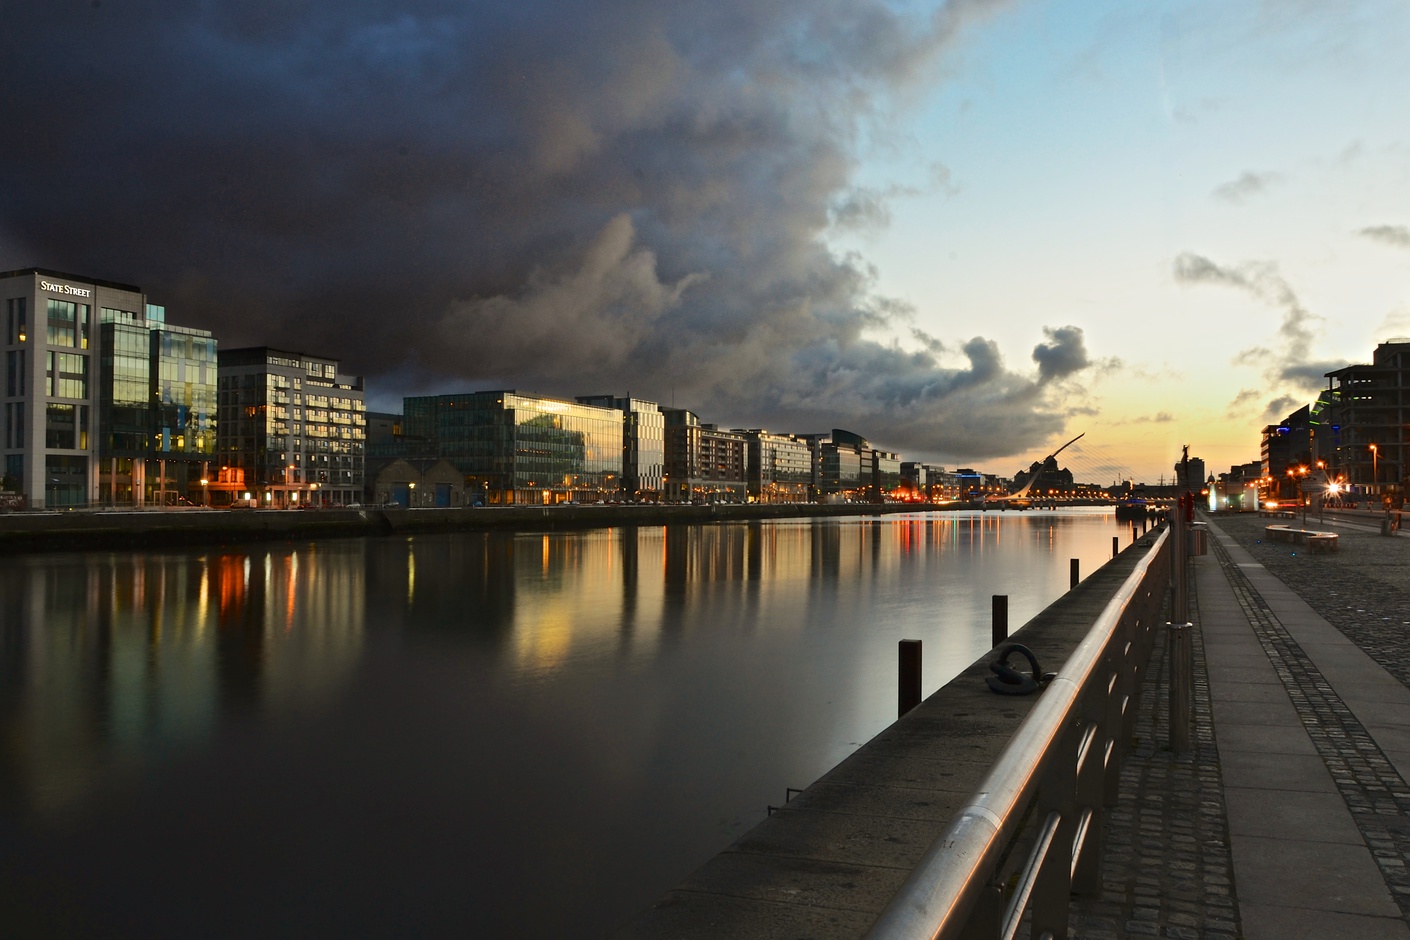 Dublin Docklands   Dublin pictures and wallpapers 1410x940